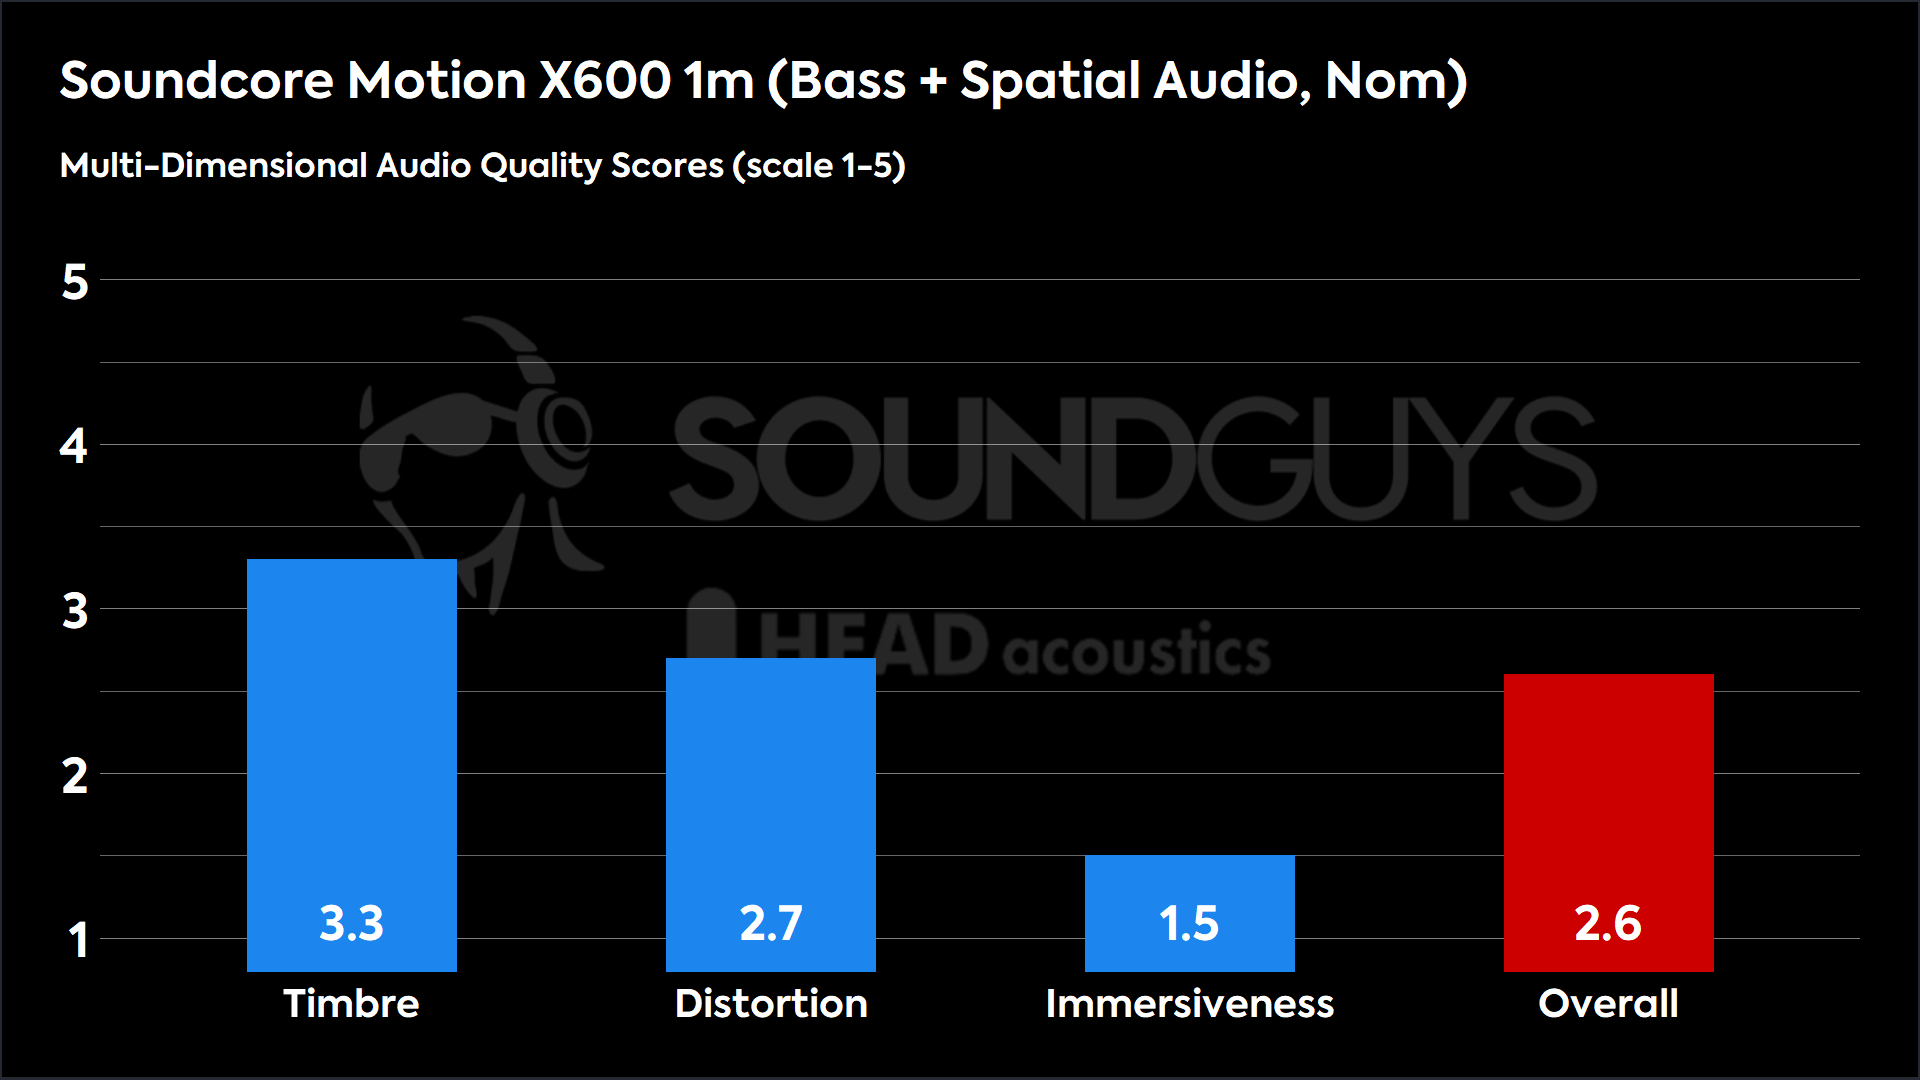 A chart showing the MDAQS results for the Anker Soundcore Motion X600 with BassUp and Spatial Audio modes enabled. 